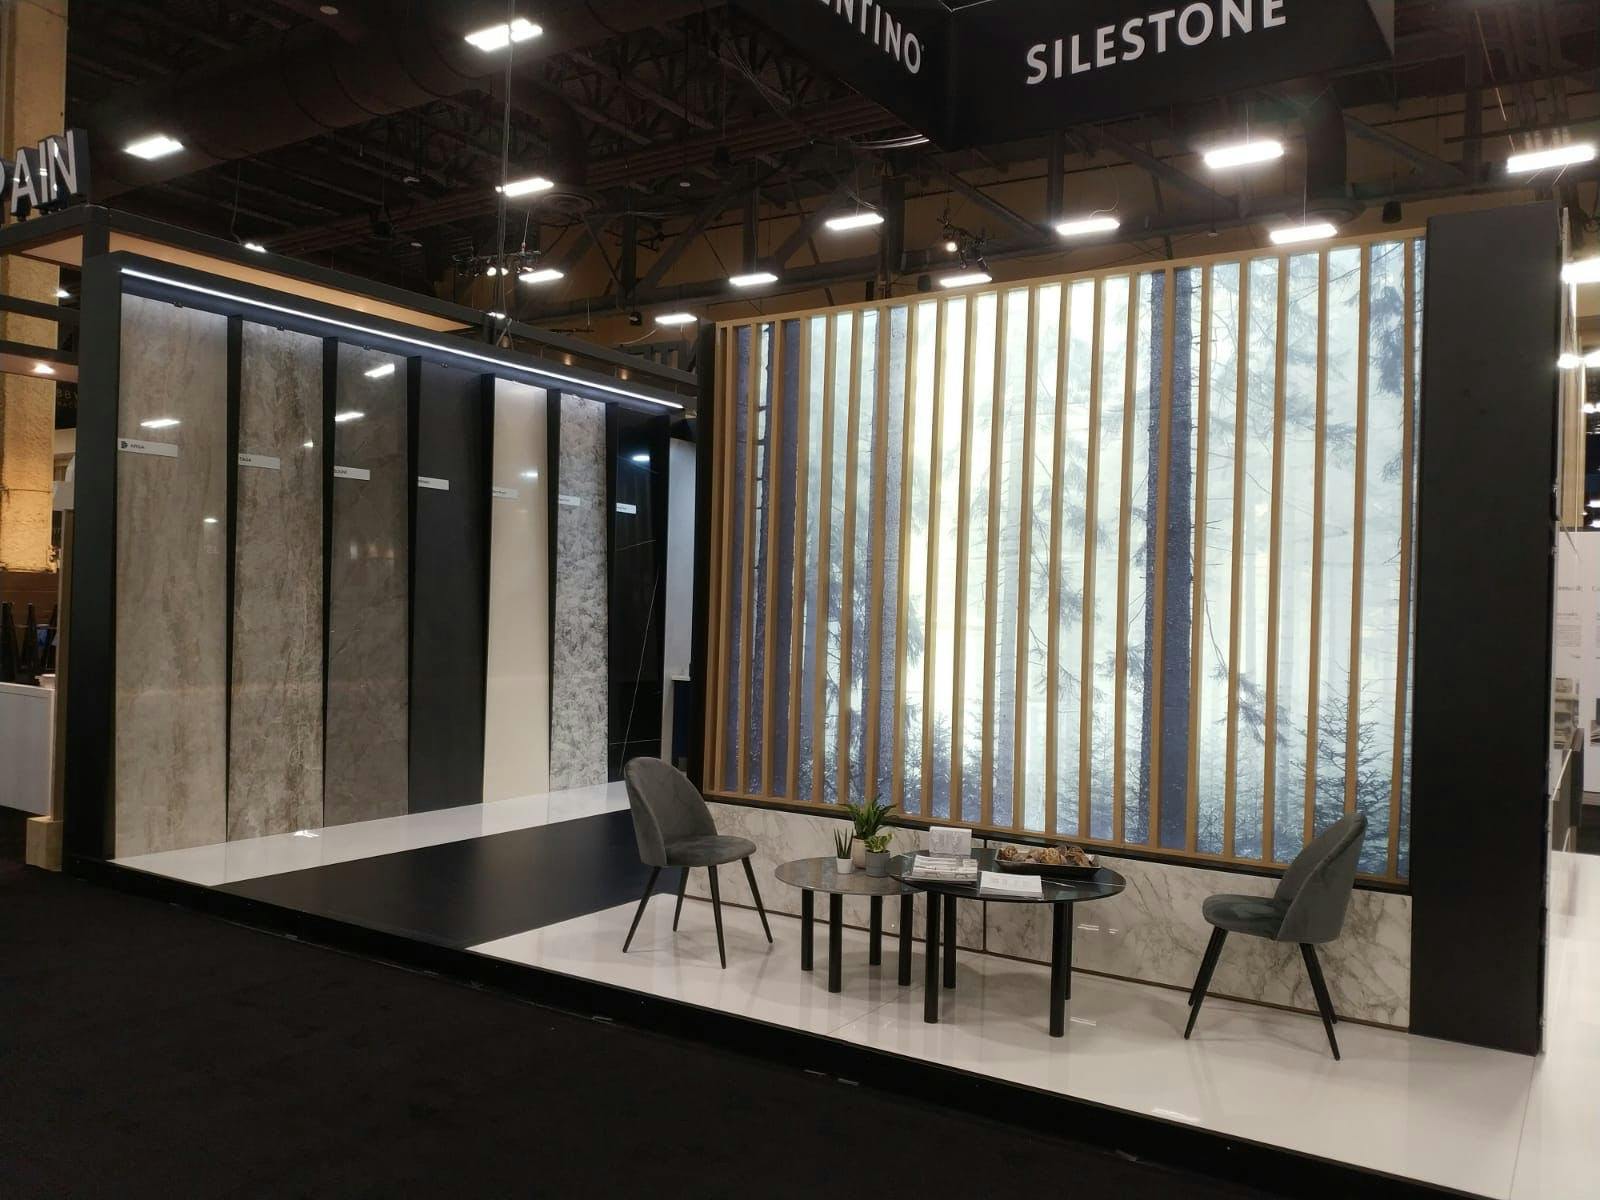 Image 34 of d935b990 8a1b 4685 91a8 cdd1a894ac98 1 in Cosentino Highlights Silestone and Dekton Offerings at HD Expo 2019 - Cosentino